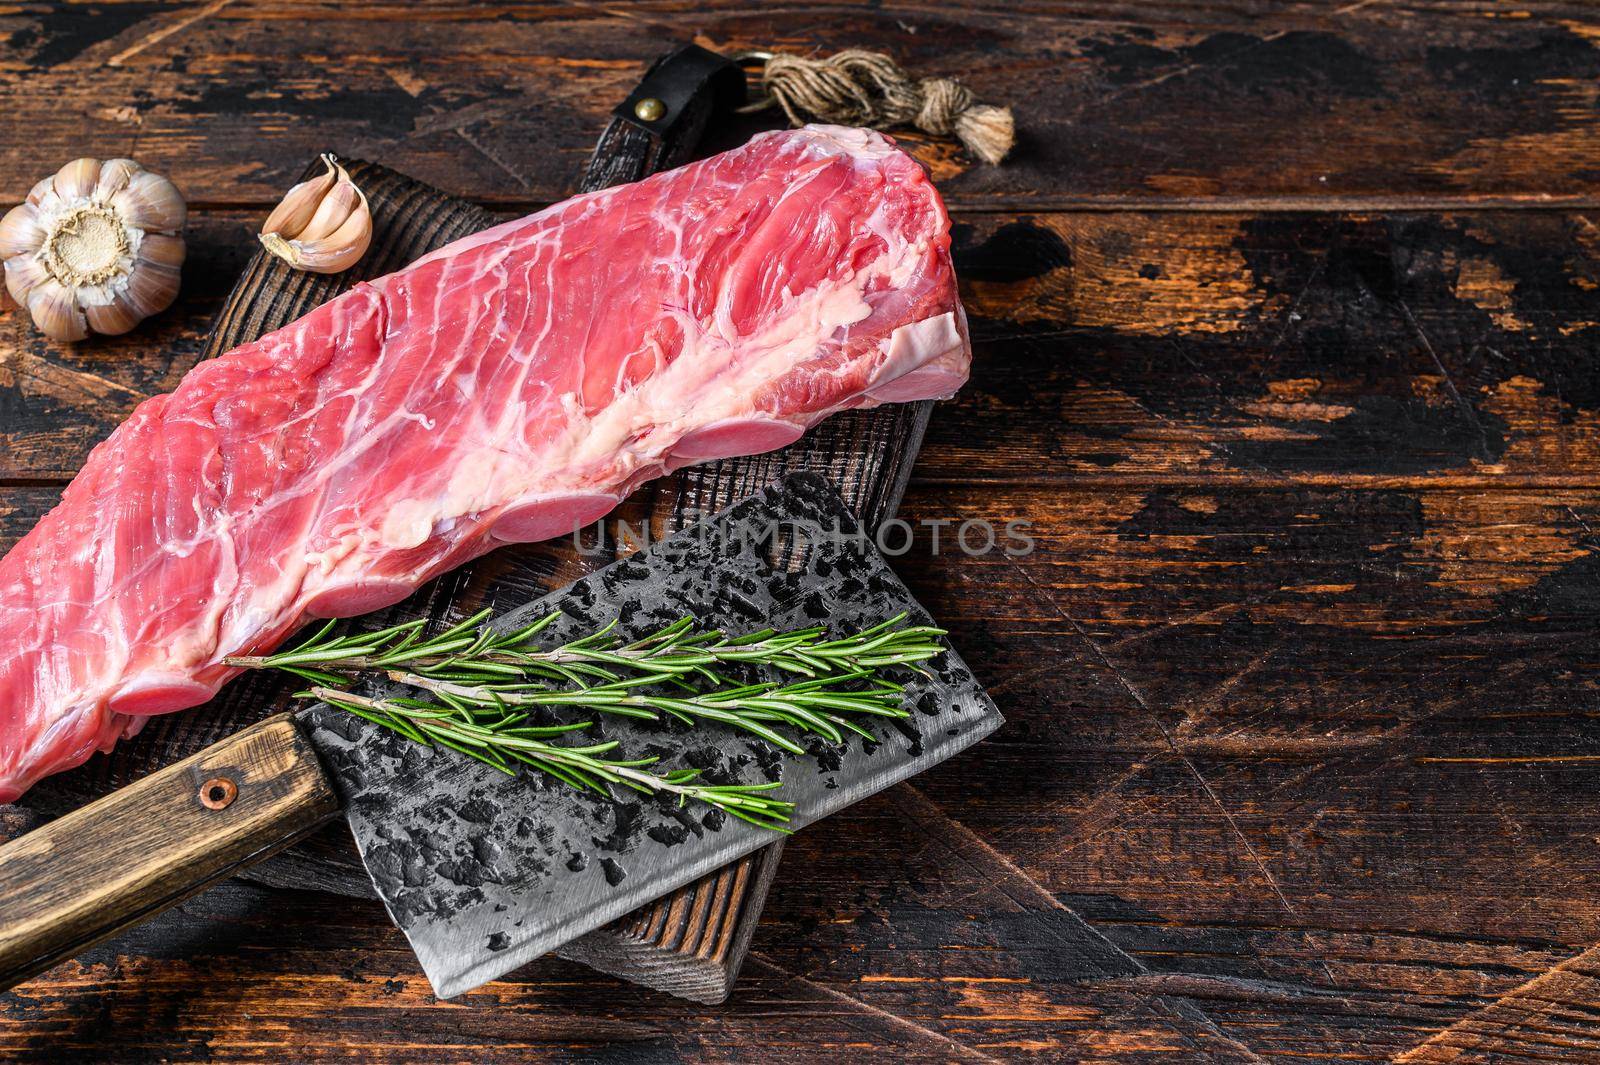 Raw veal brisket meat on short spare rib with butcher knife. Dark wooden background. Top view. Copy space.